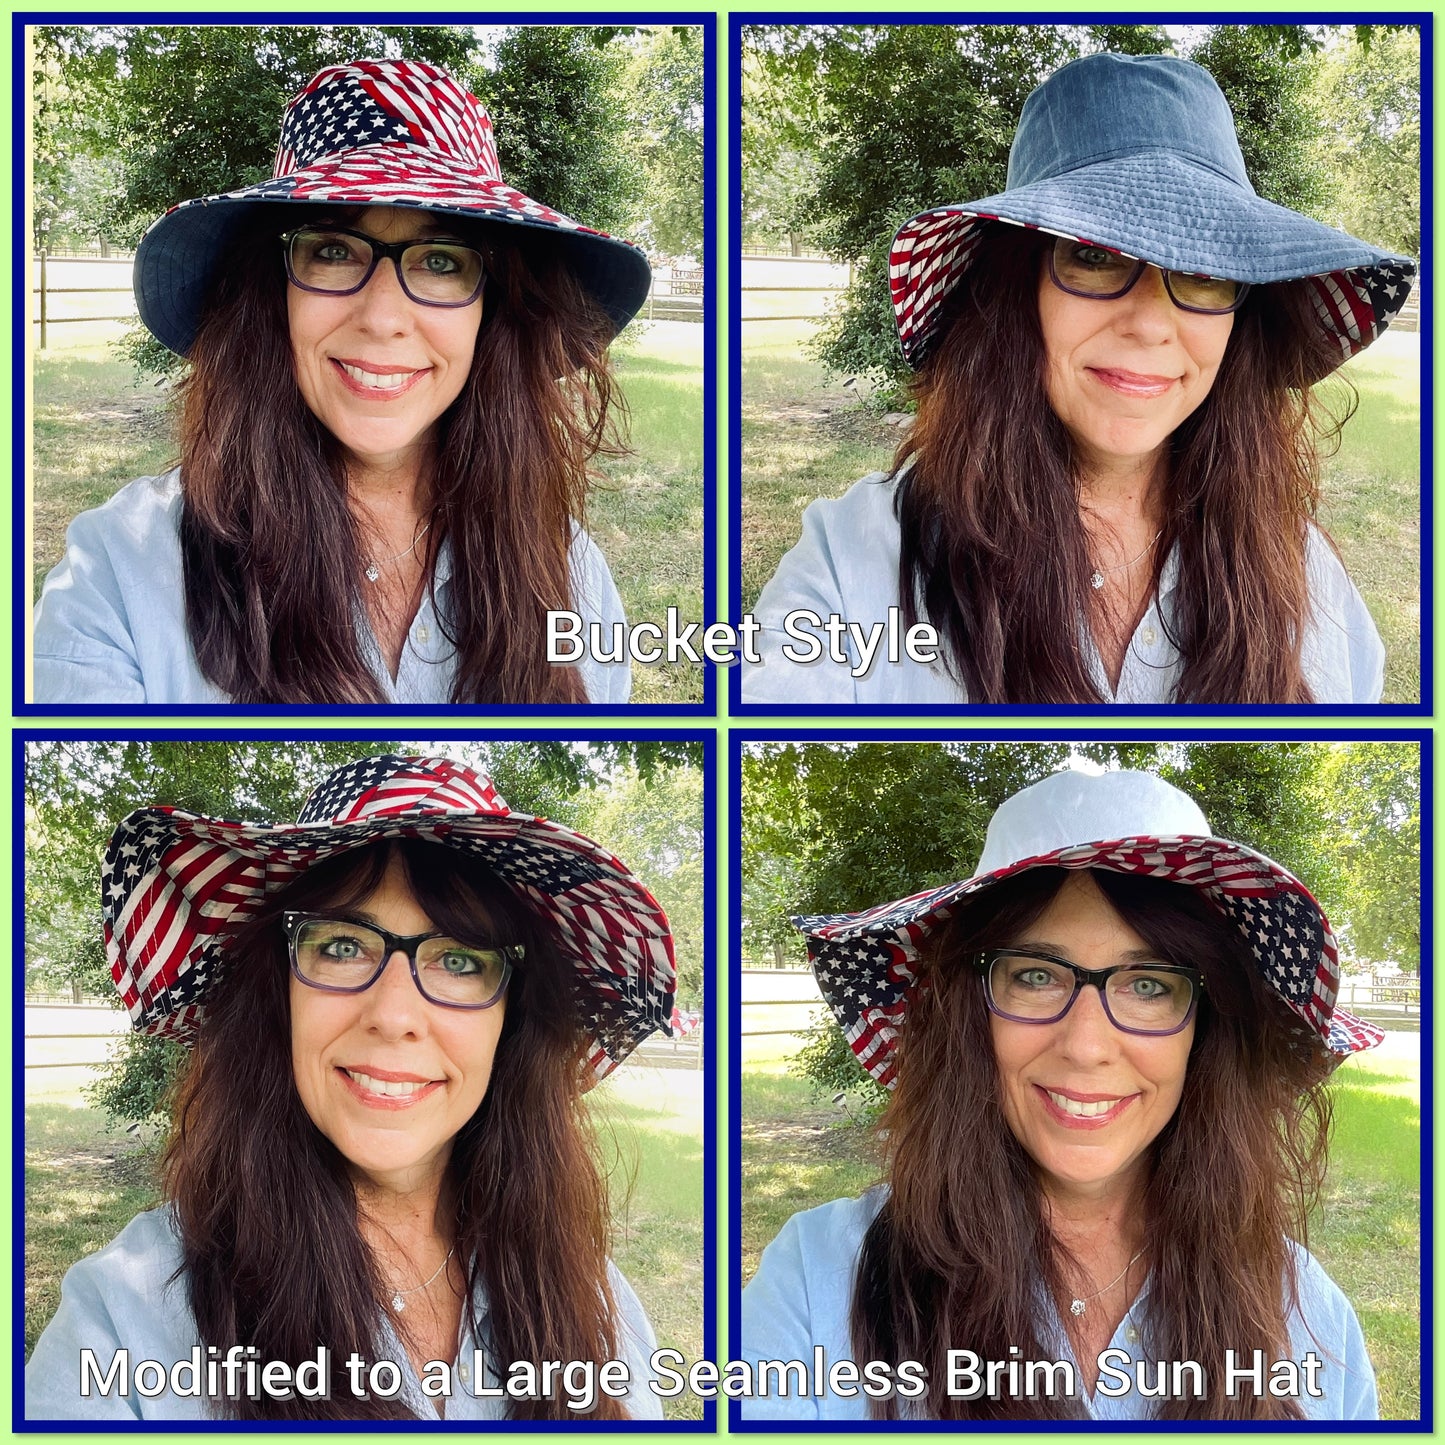 Bucket Hat to Sun Hat- Video 8 continued